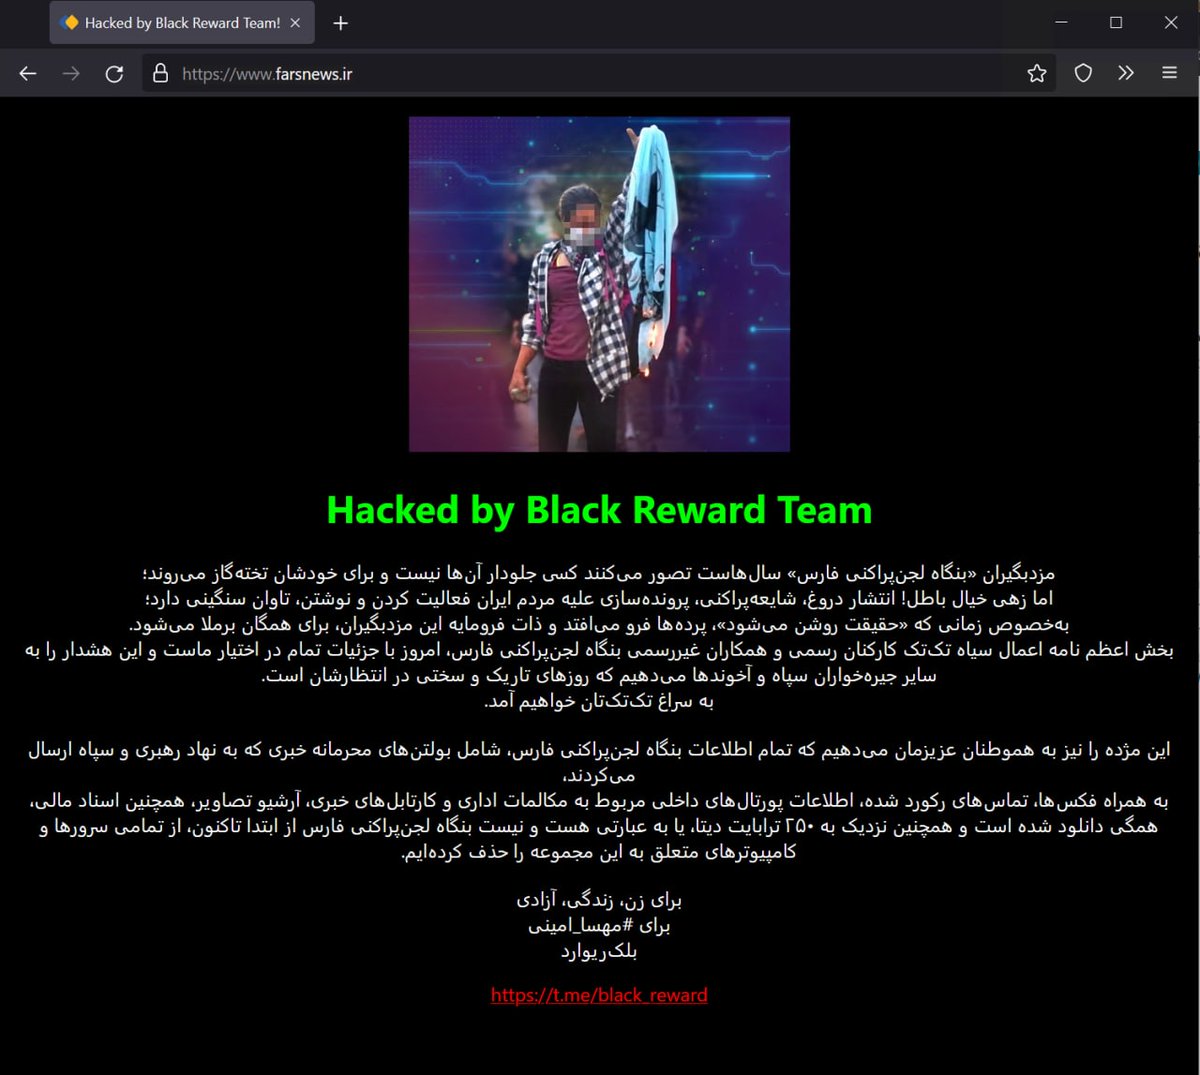 A group calling itself Black Reward claims it hacked the website of IRGC-controlled Fars News. The group also claims it deleted the site's database